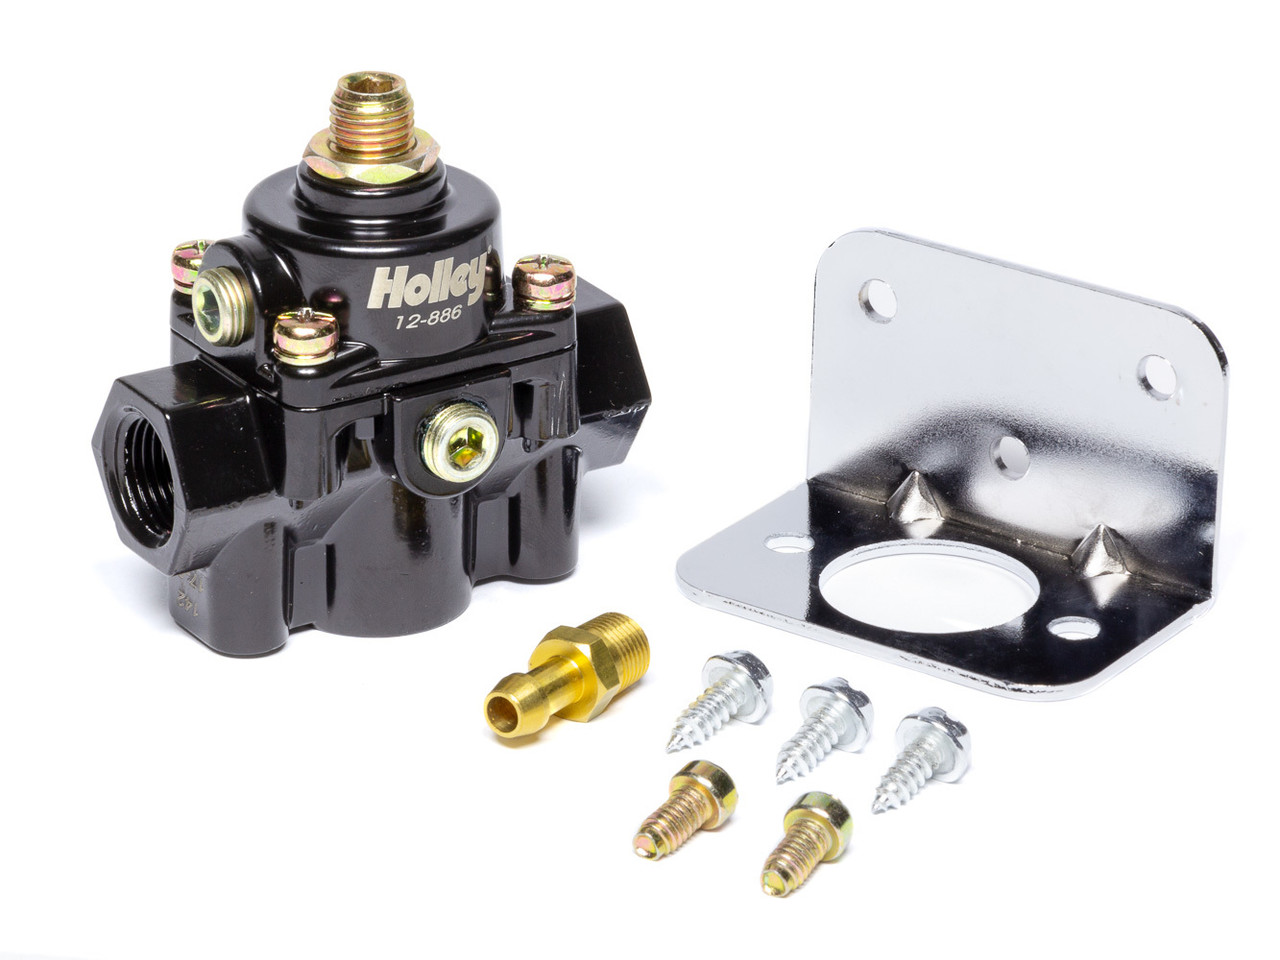 Holley Fuel Regulator - EFI Bypass Style 60 PSI